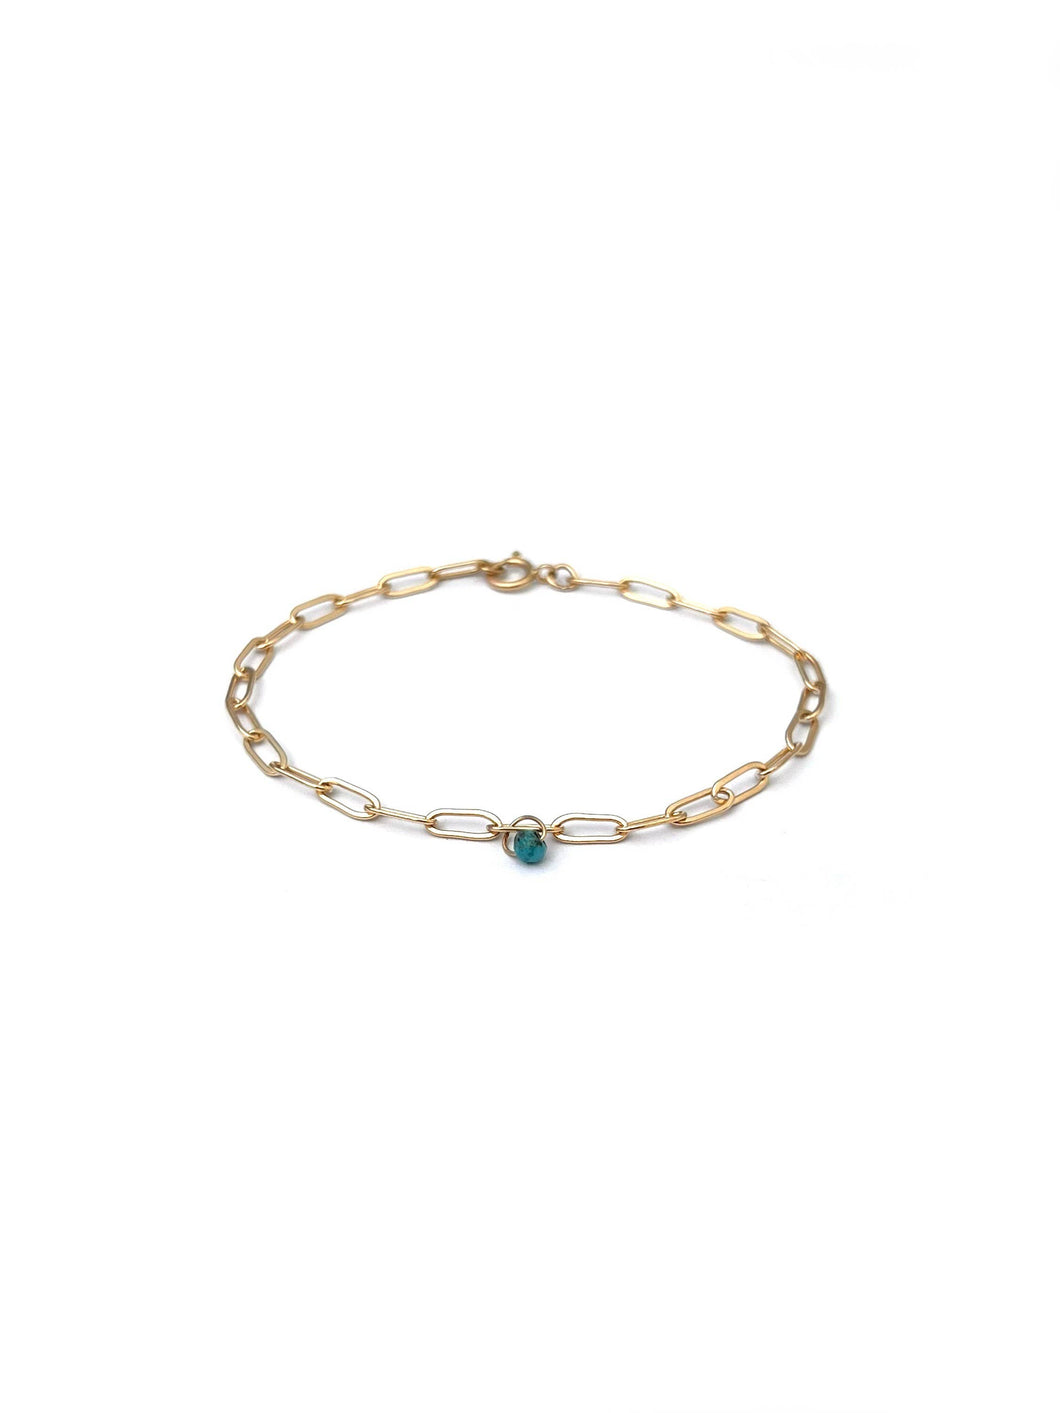 CLP Jewelry - Goldfill Paperclip Bracelet-Turquoise